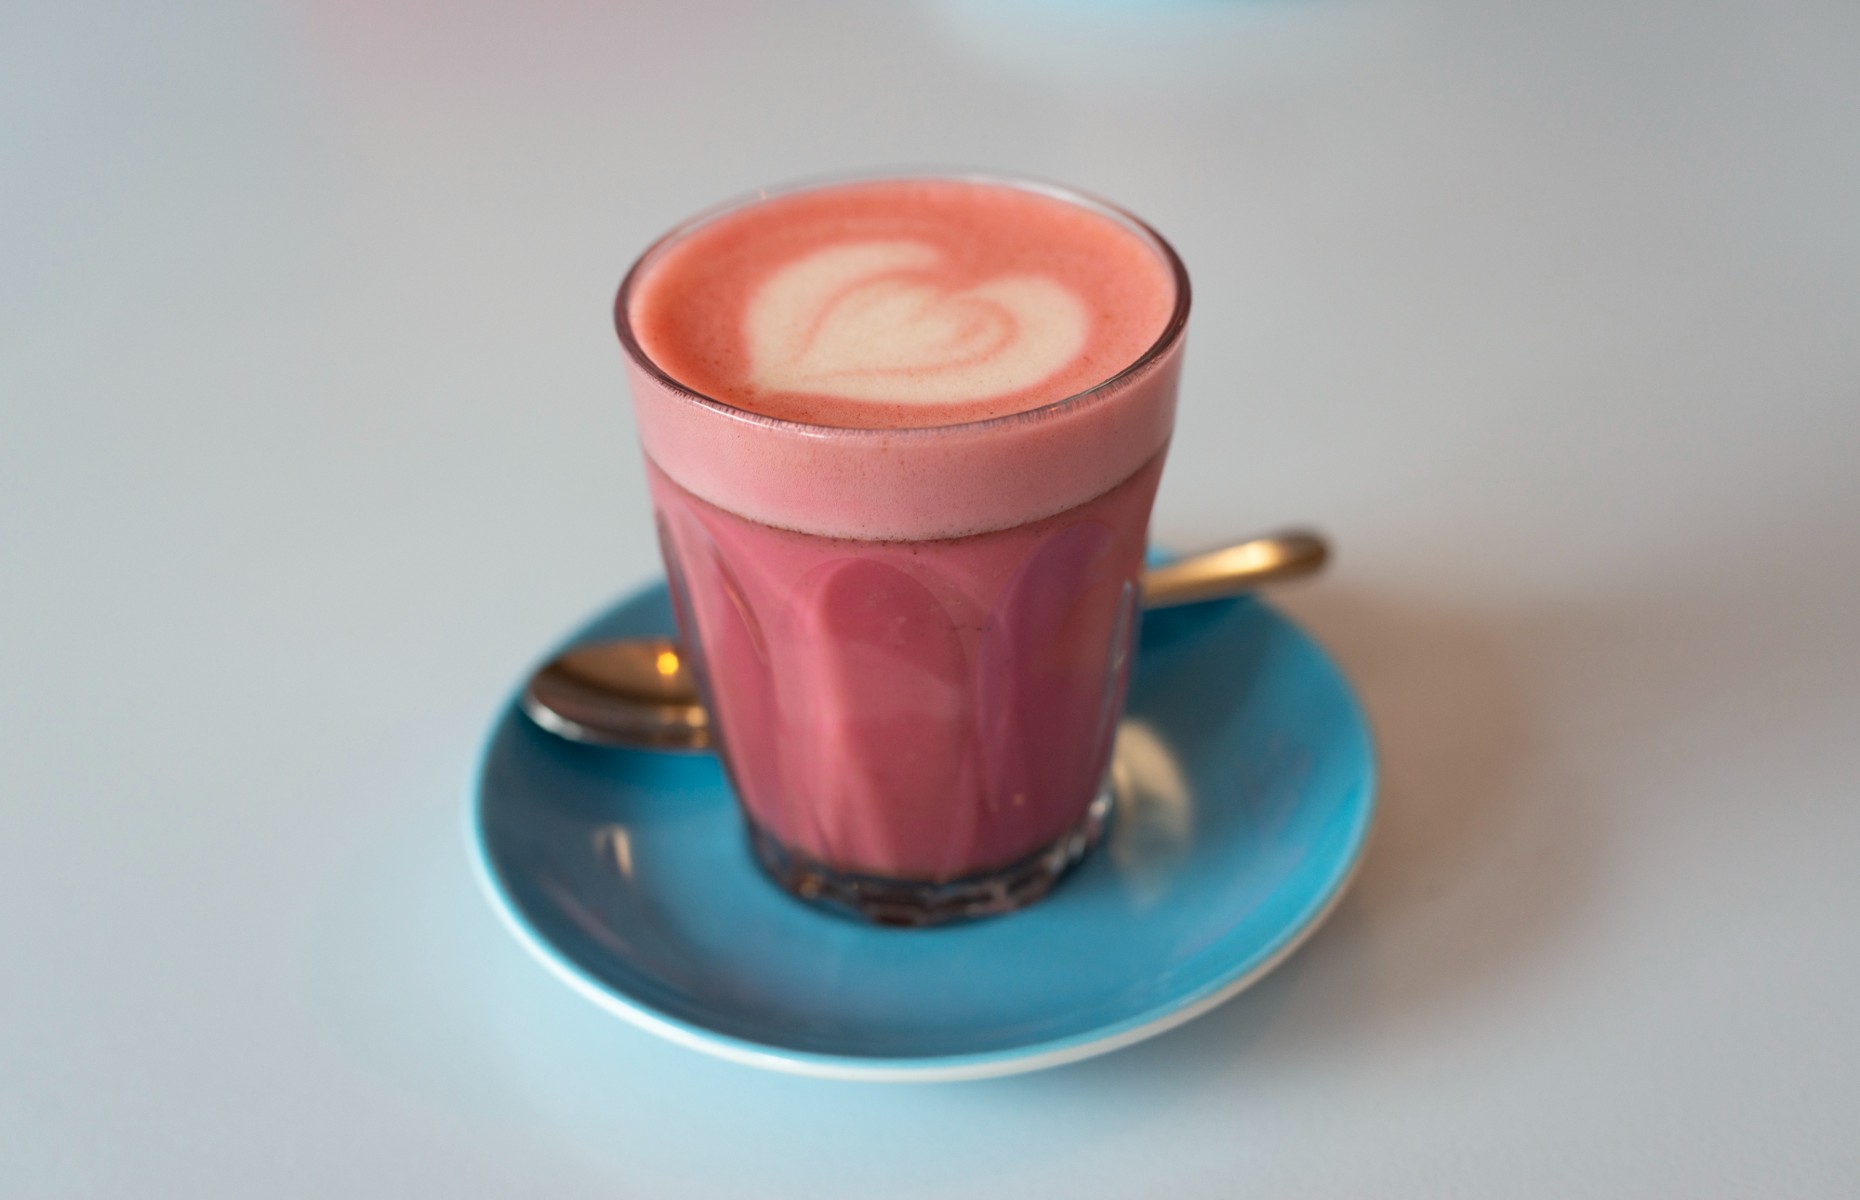 A colourful latte at Skinny Dip Coffee (Image: Diana Jarvis)